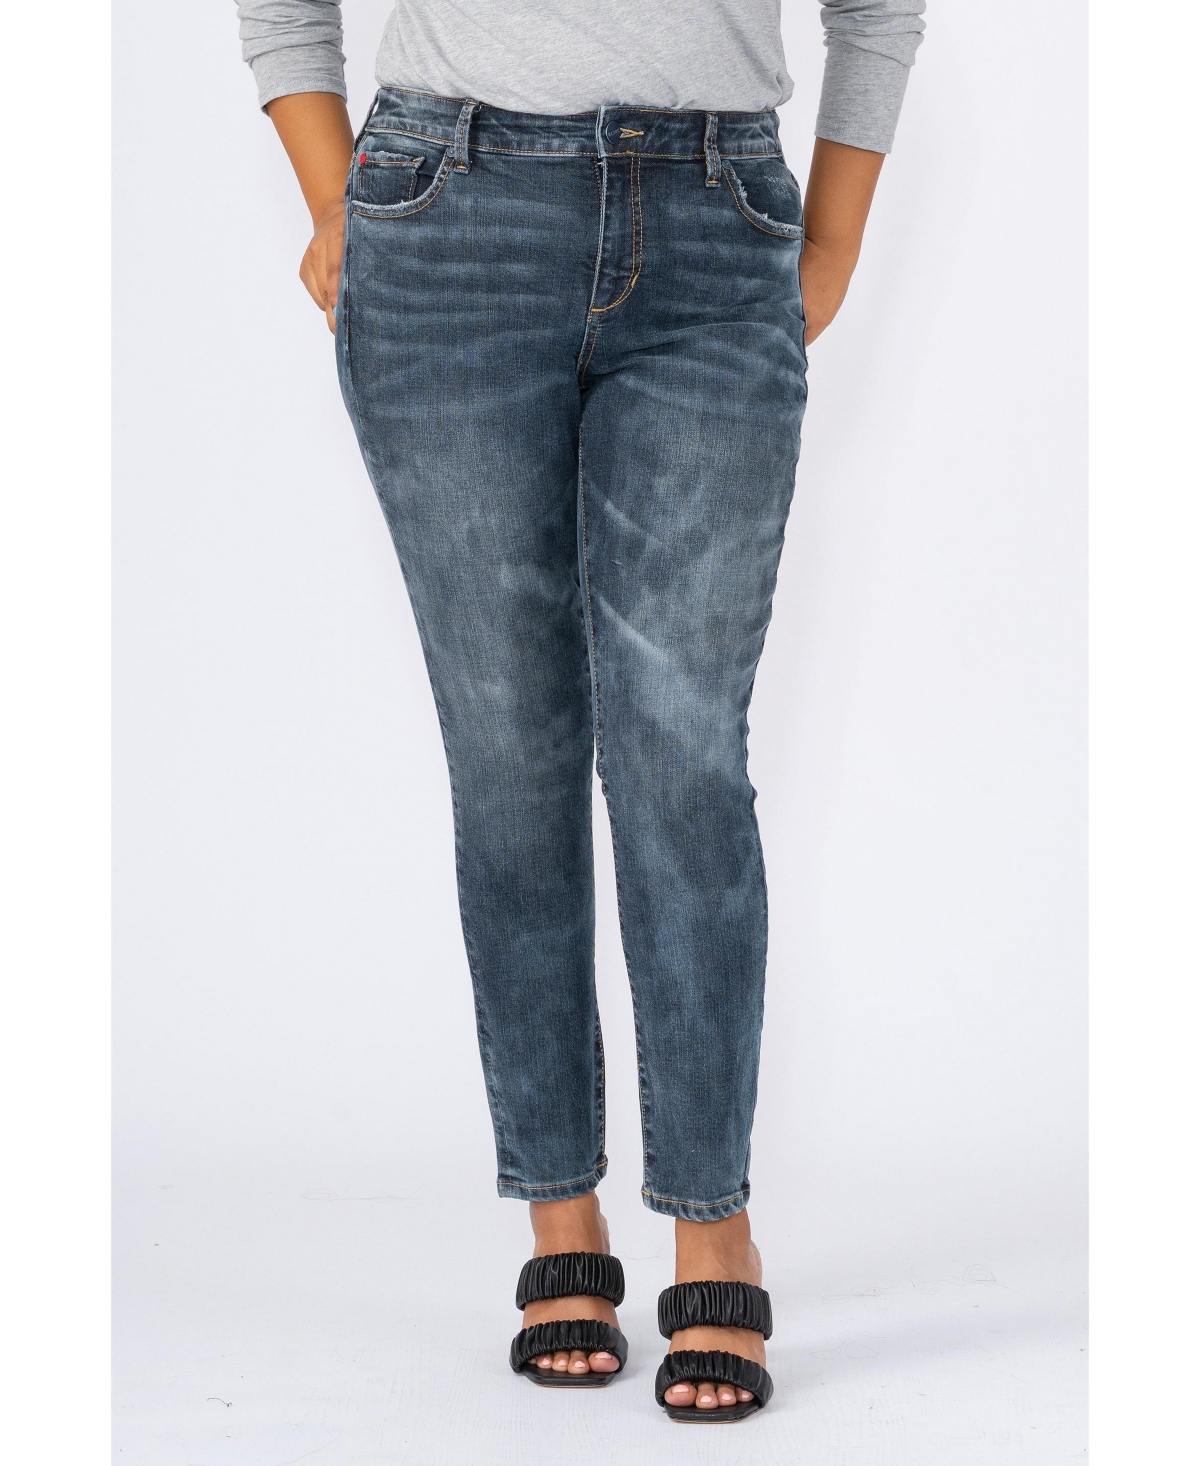 Women's High Rise Ankle Skinny Jeans - Emory